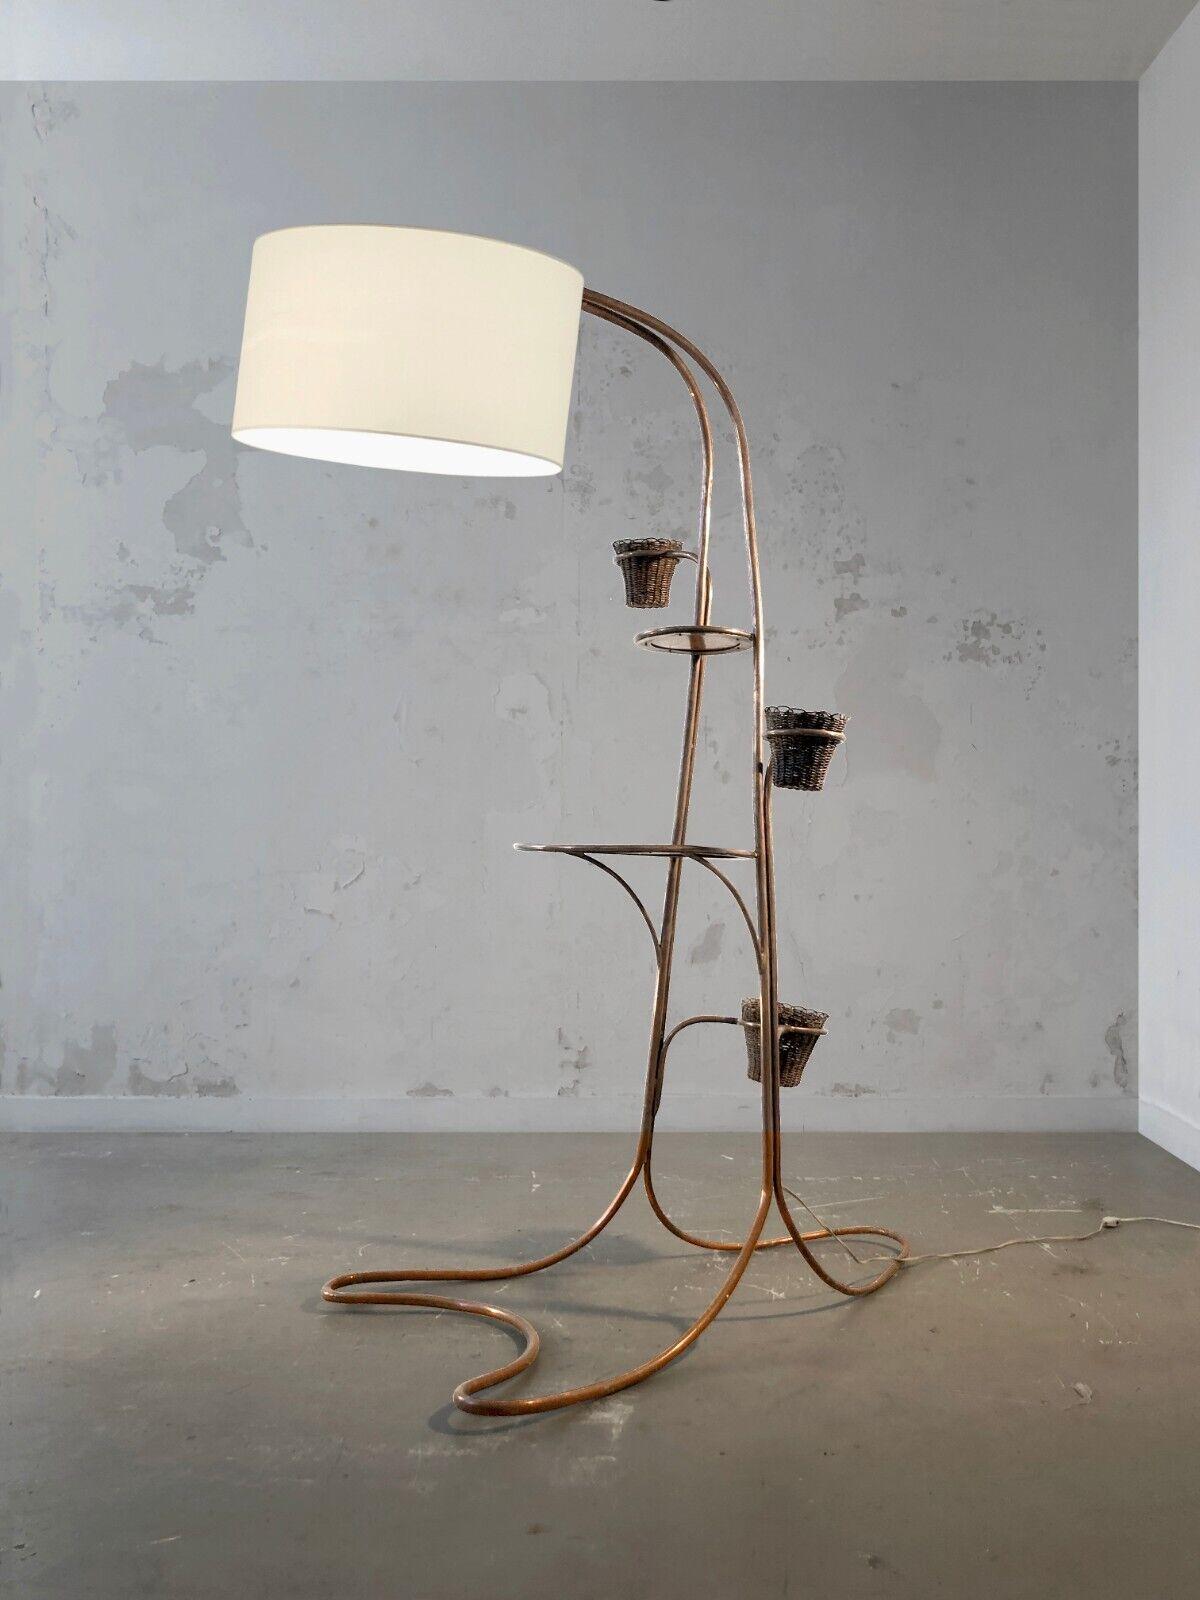 A huge, spectacular and sculptural plant holder floor lamp, Free-Form, Modernist, large Free-Form structure in copper-plated tubular brass, welded and folded, 2 circular wooden shelves, 3 plant holder arms with pots in woven rattan, the whole topped